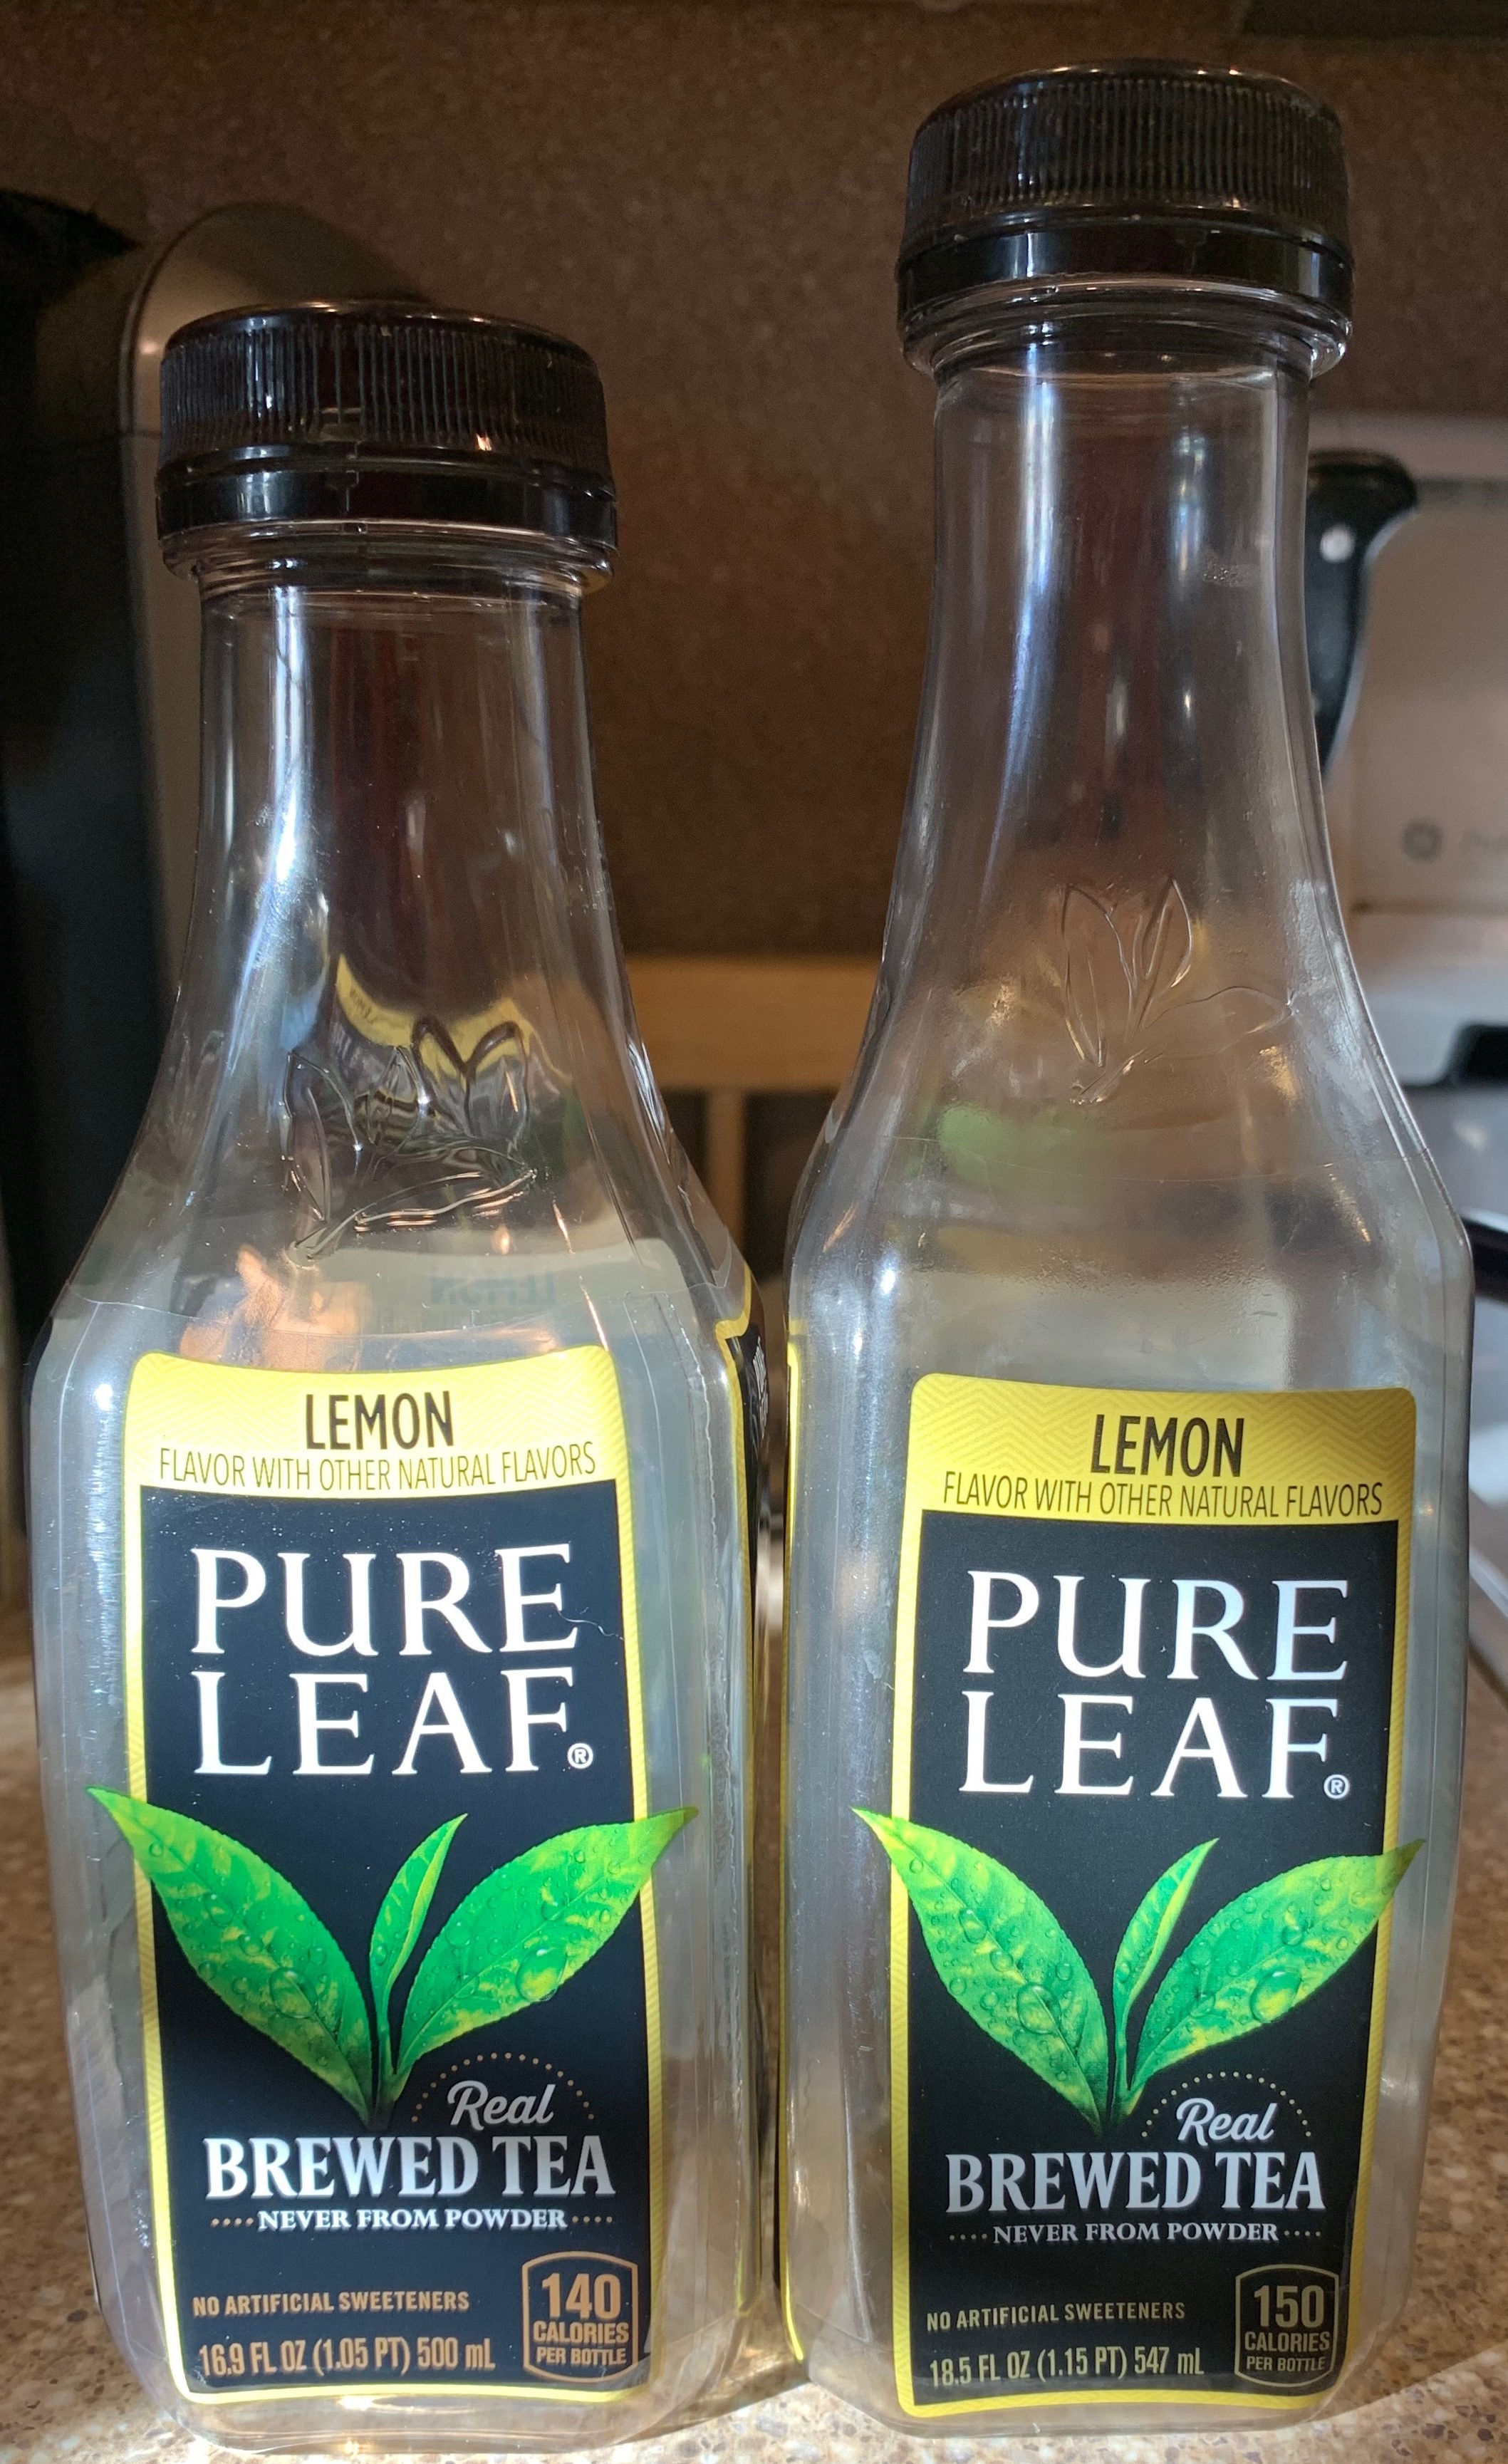 Incredible Shrinking Products - Pure Leaf Edition 